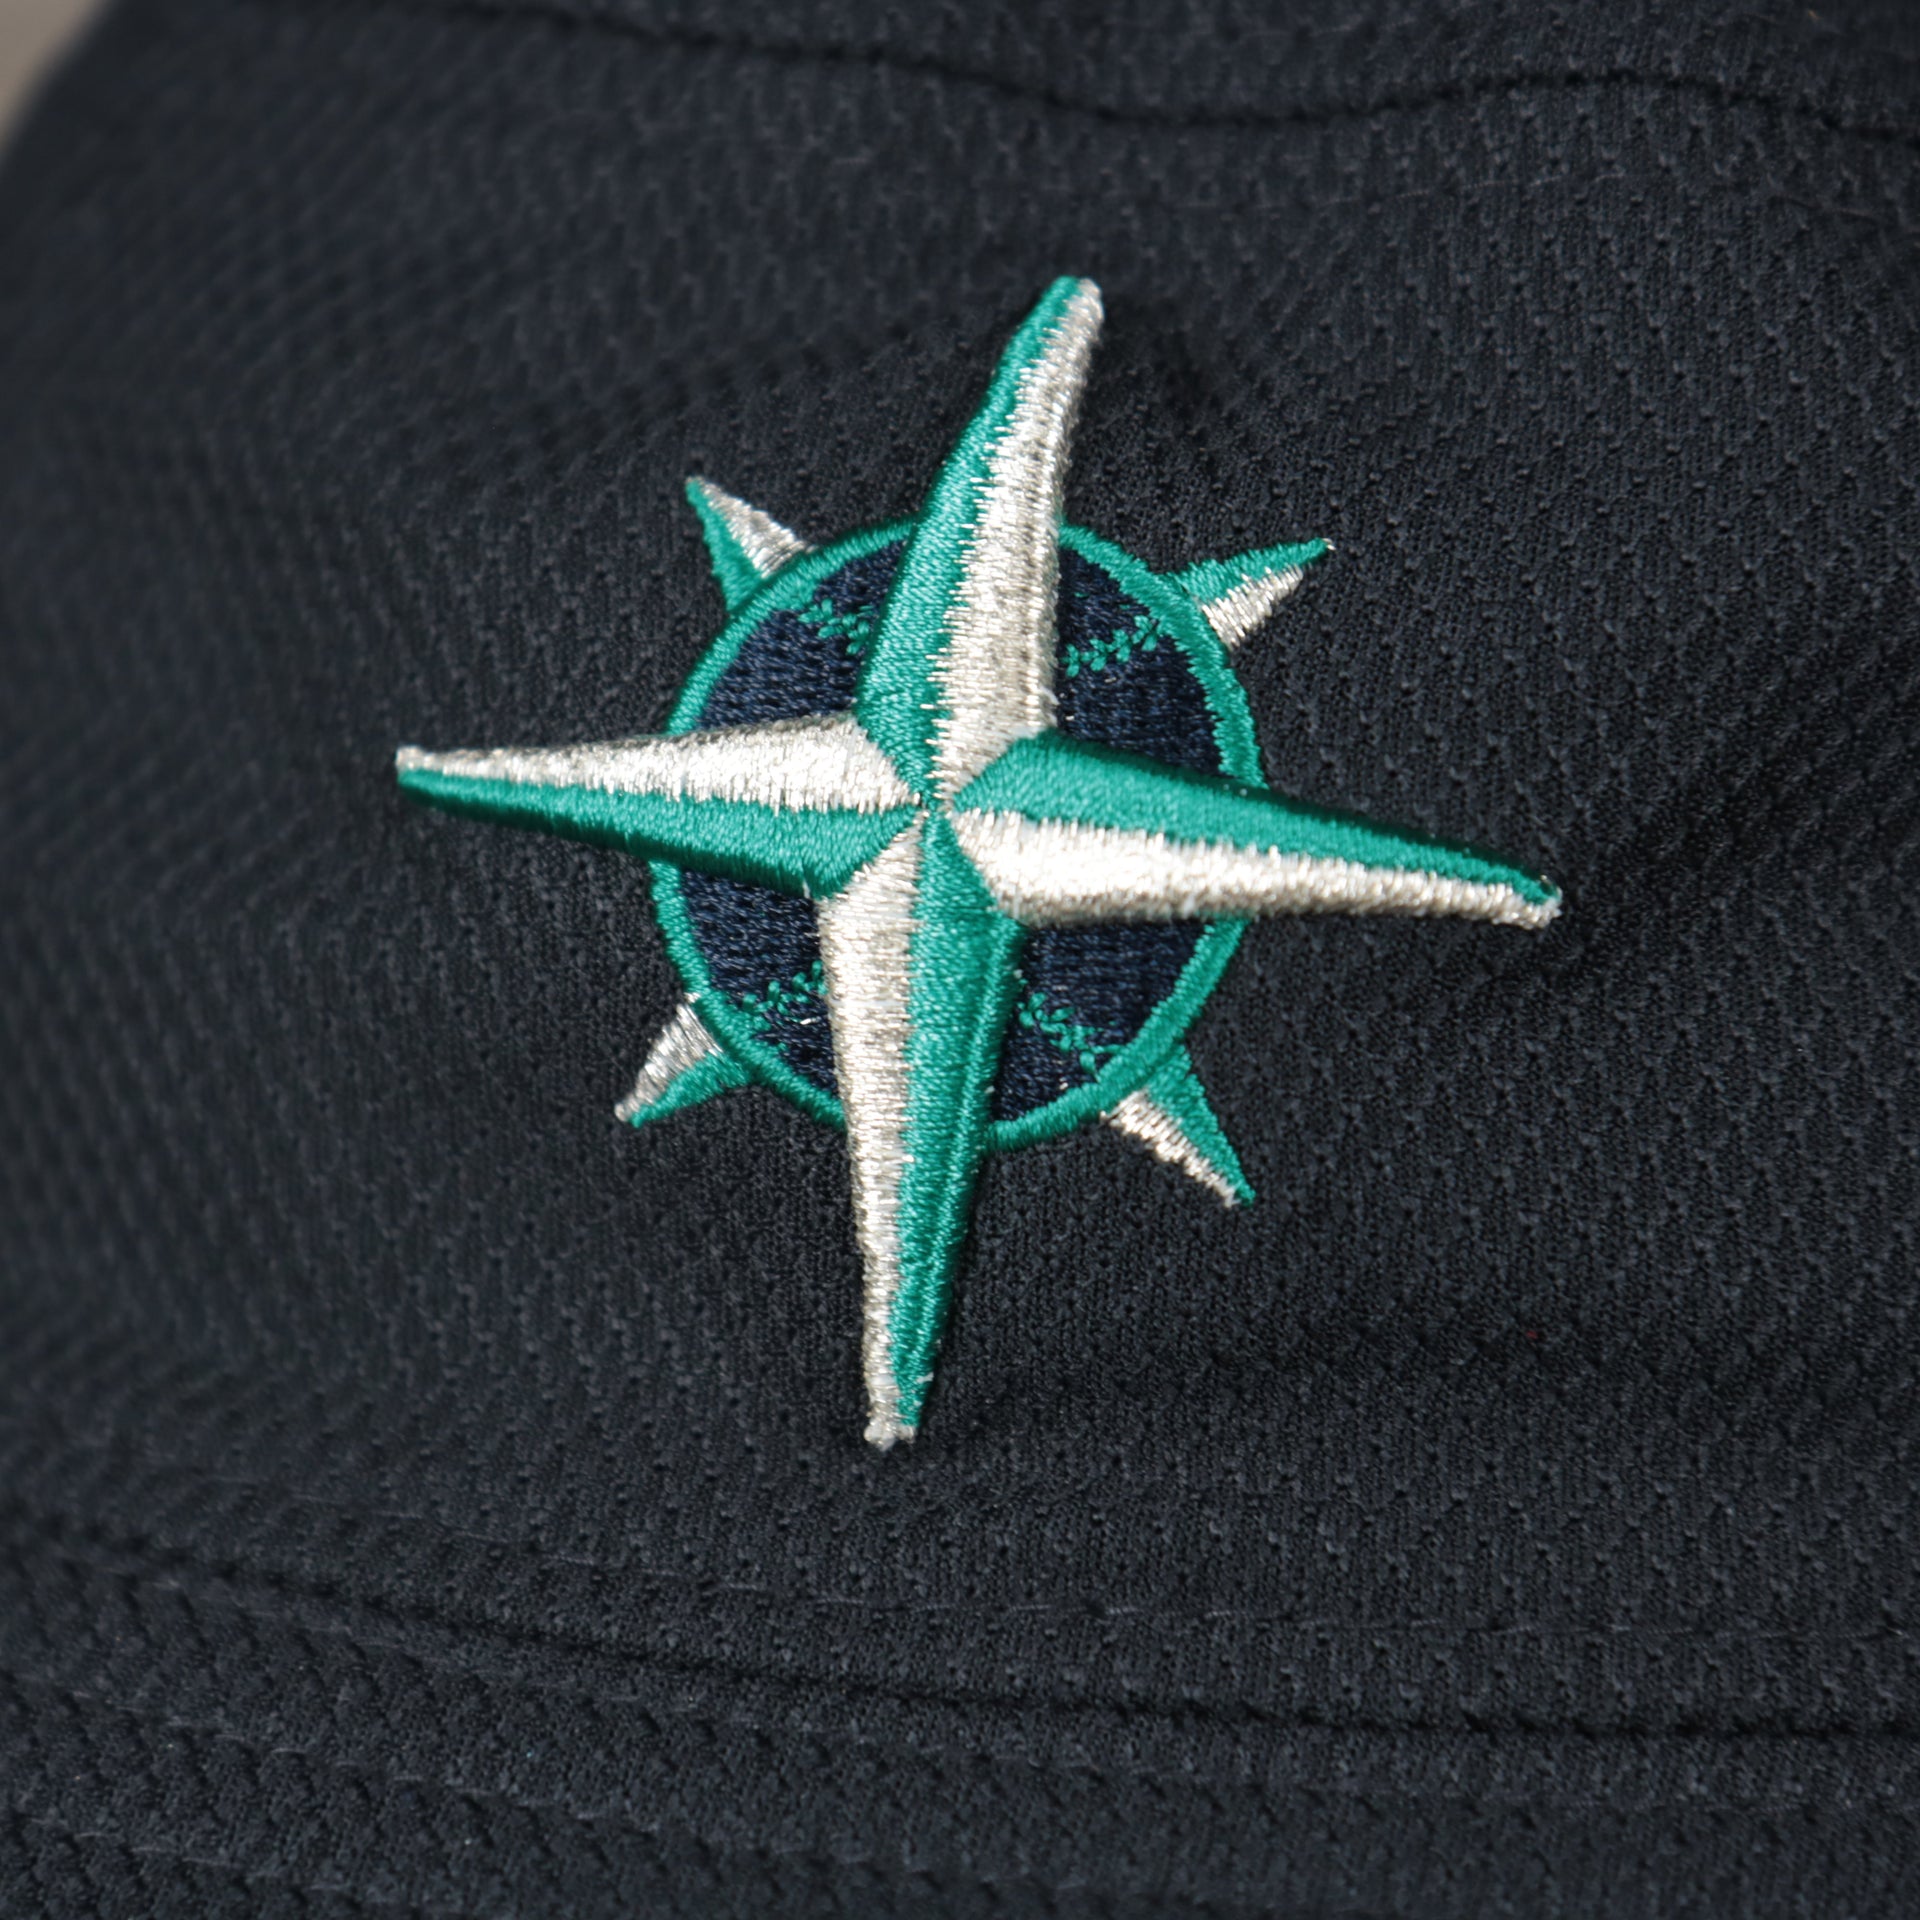 A close up of the Mariners logo on the Seattle Mariners MLB 2022 Spring Training Onfield Bucket Hat